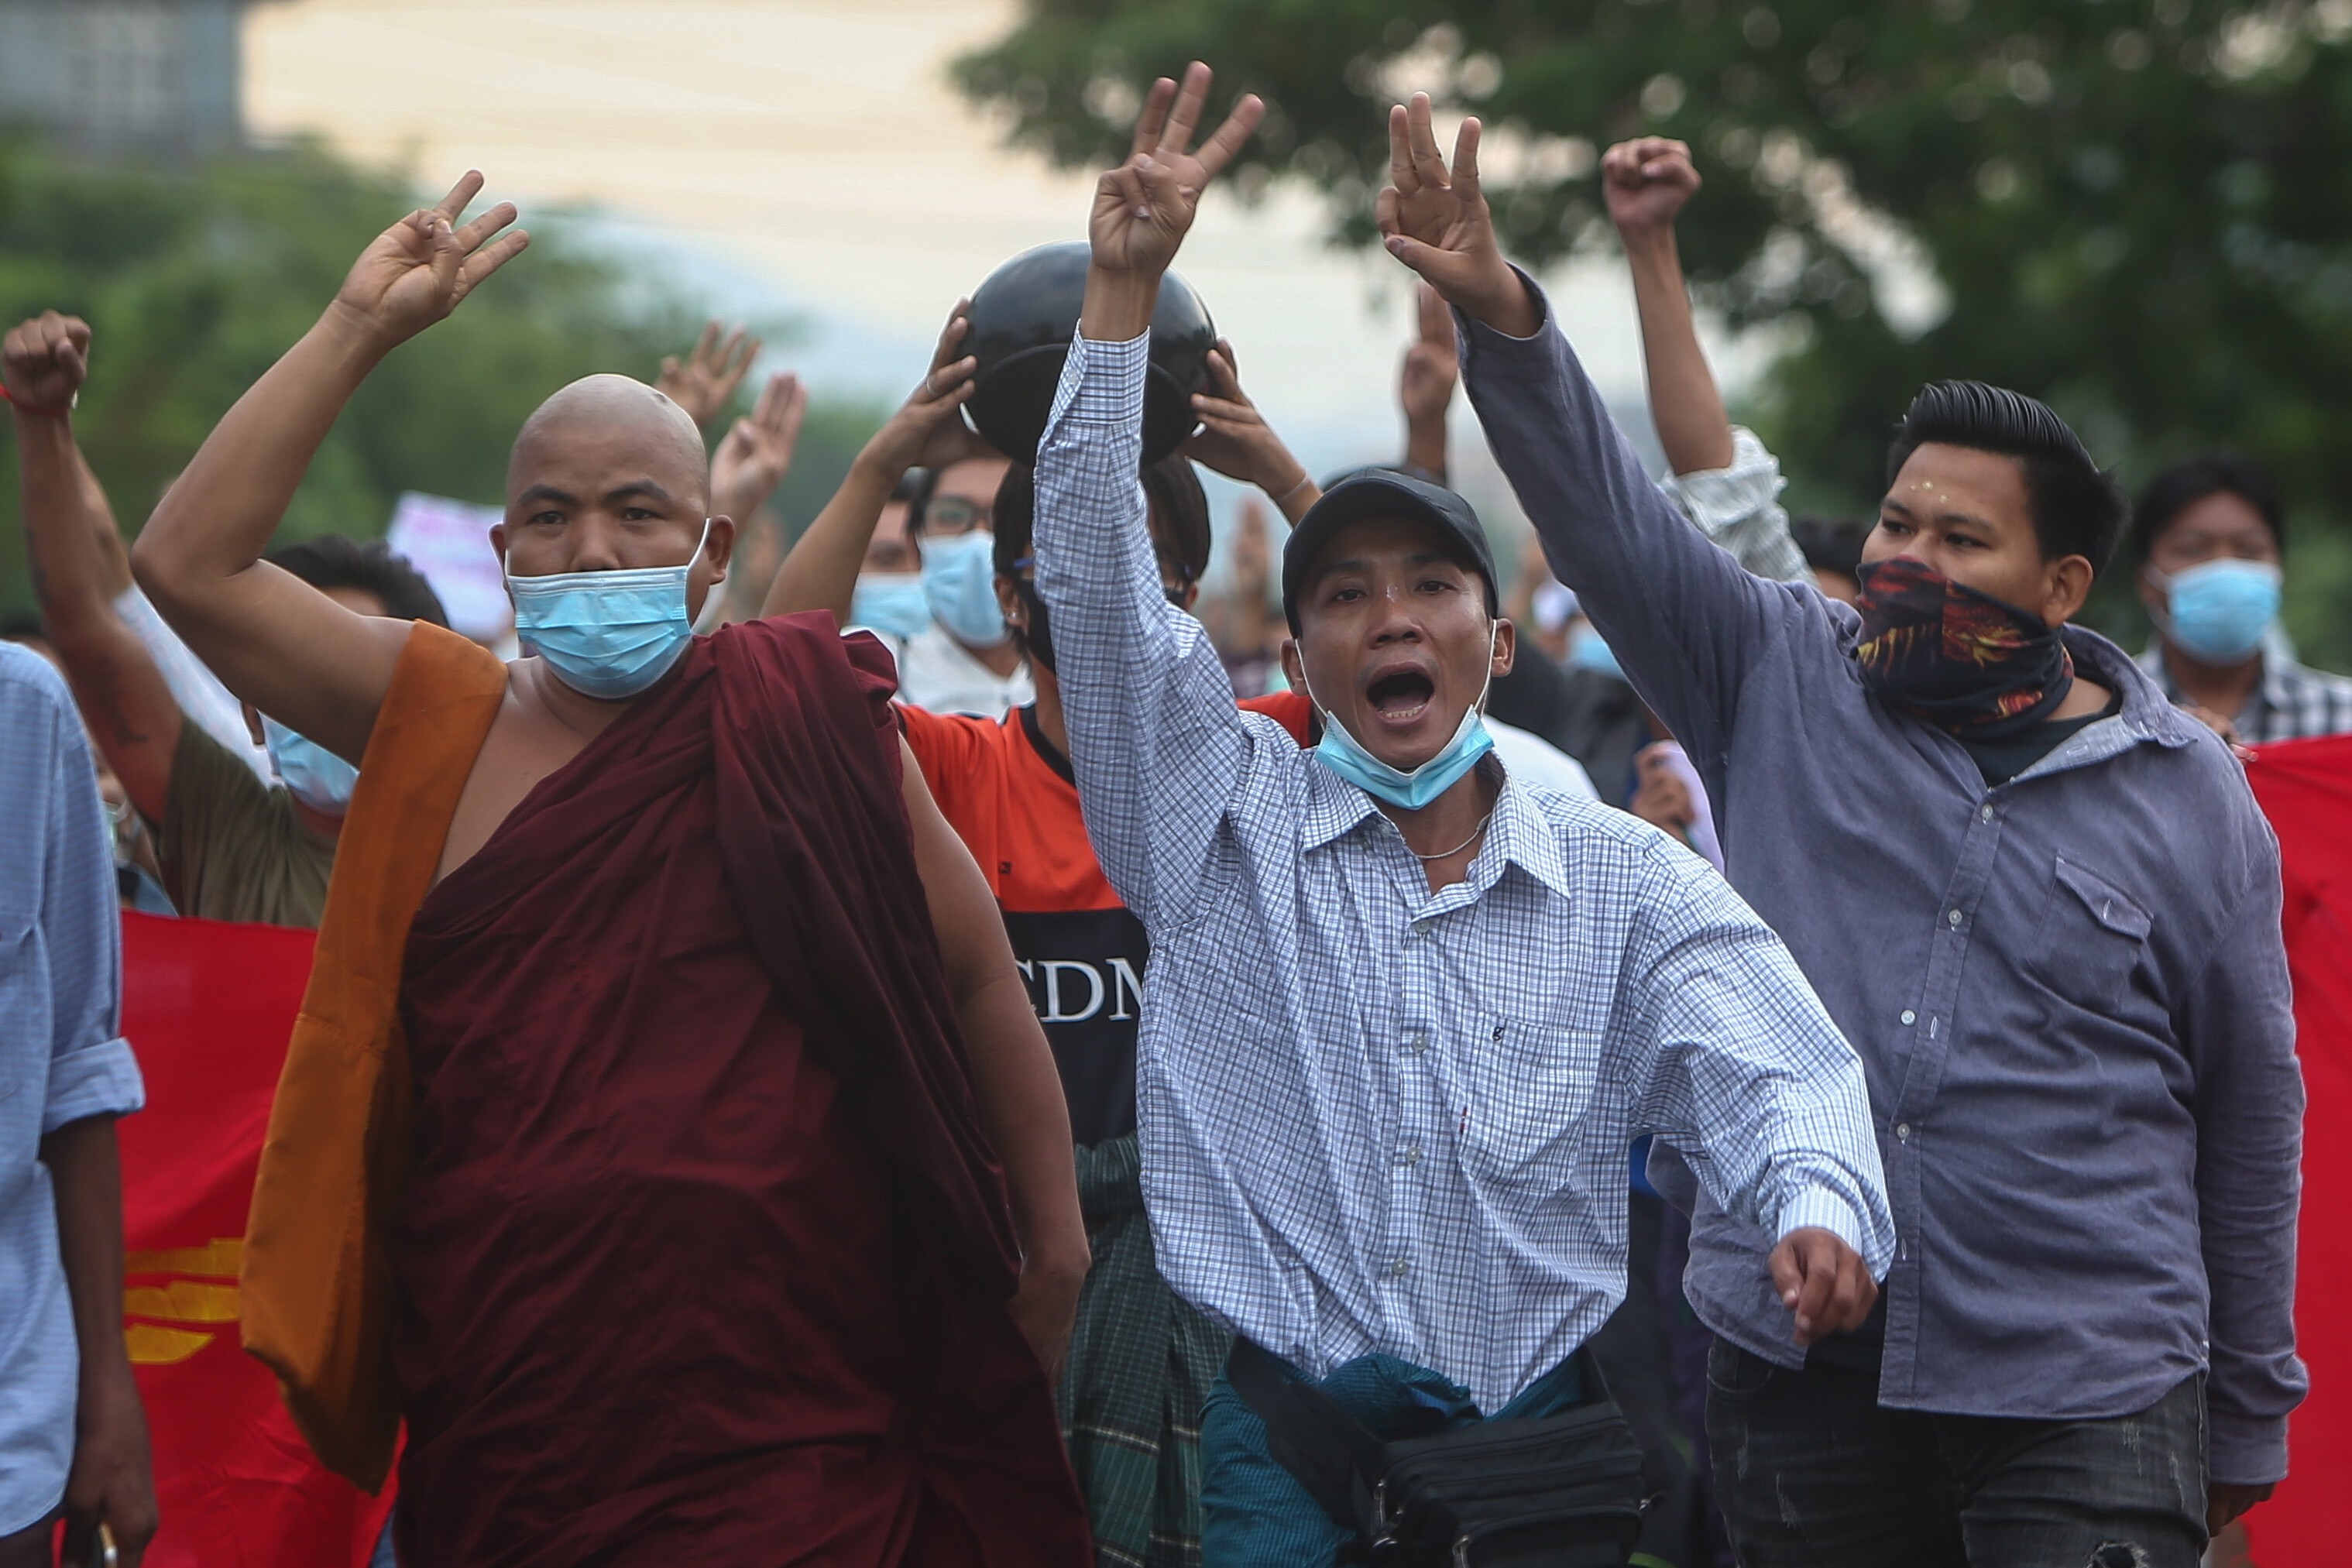 Demonstrators march during an anti-military coup protest in Mandalay on May 3, 2021. Photo: EPA-EFE